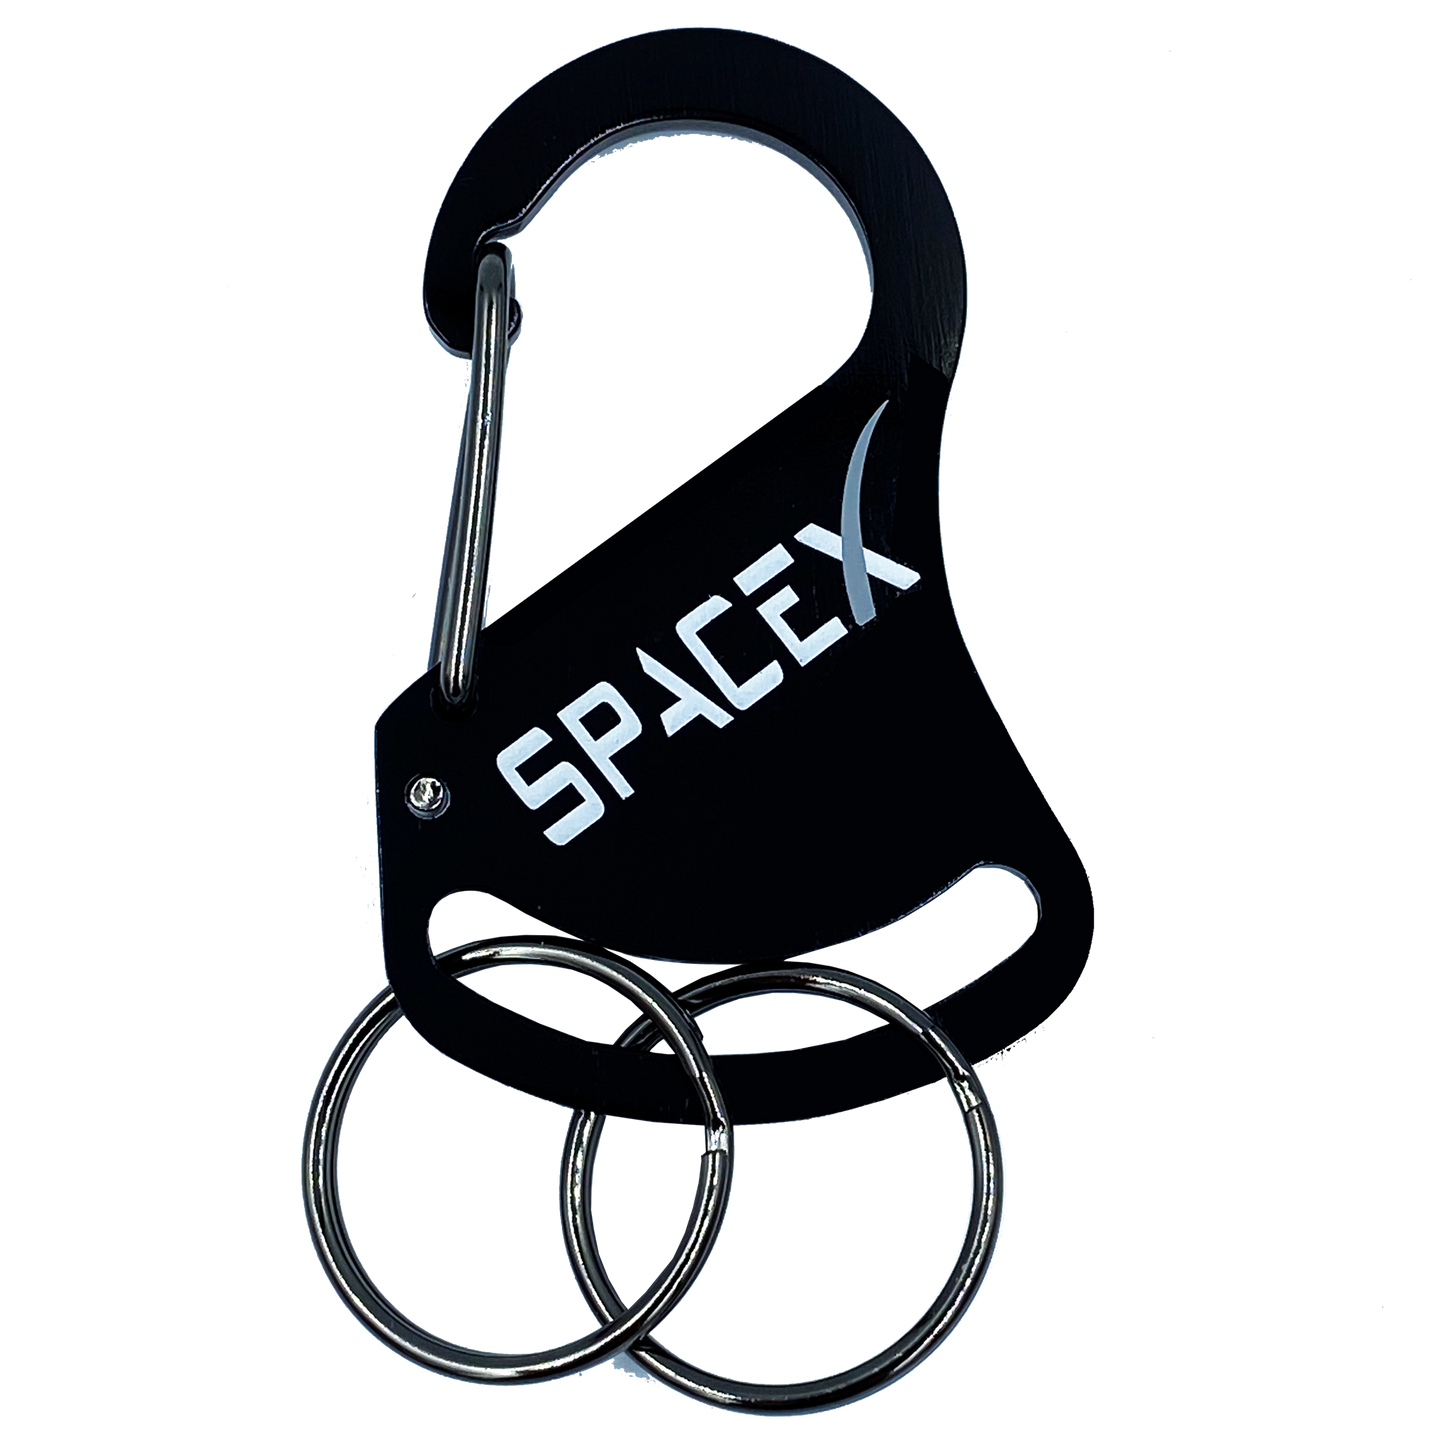 DL8-10 SpaceX Carabiner Keychains with 2 key rings great gift for Tesla owners